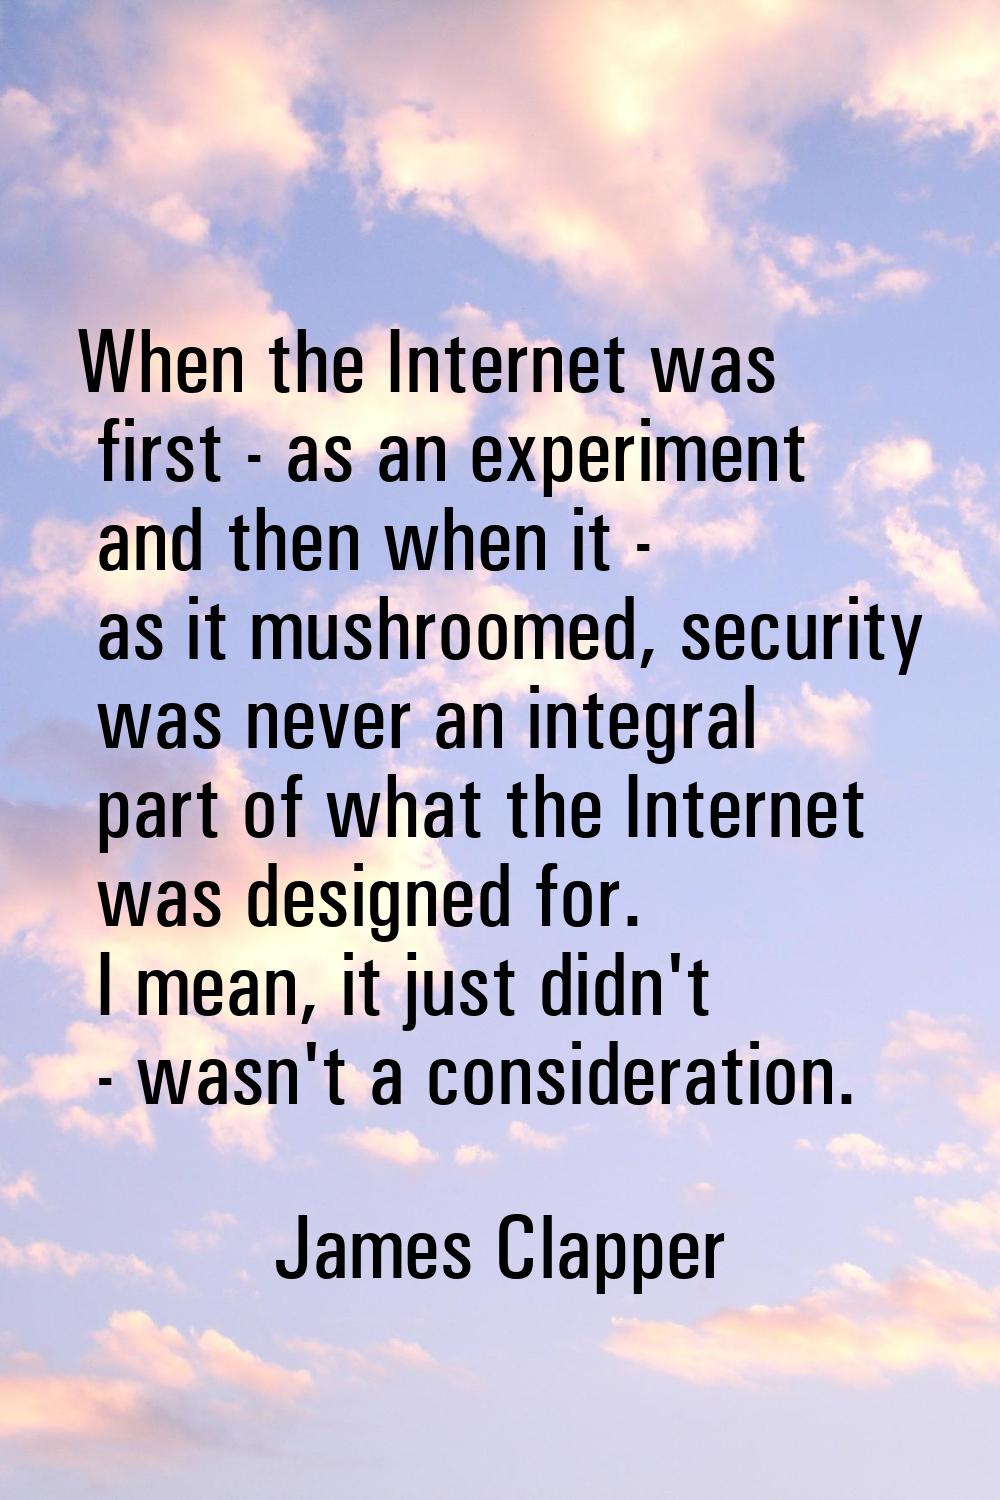 When the Internet was first - as an experiment and then when it - as it mushroomed, security was ne